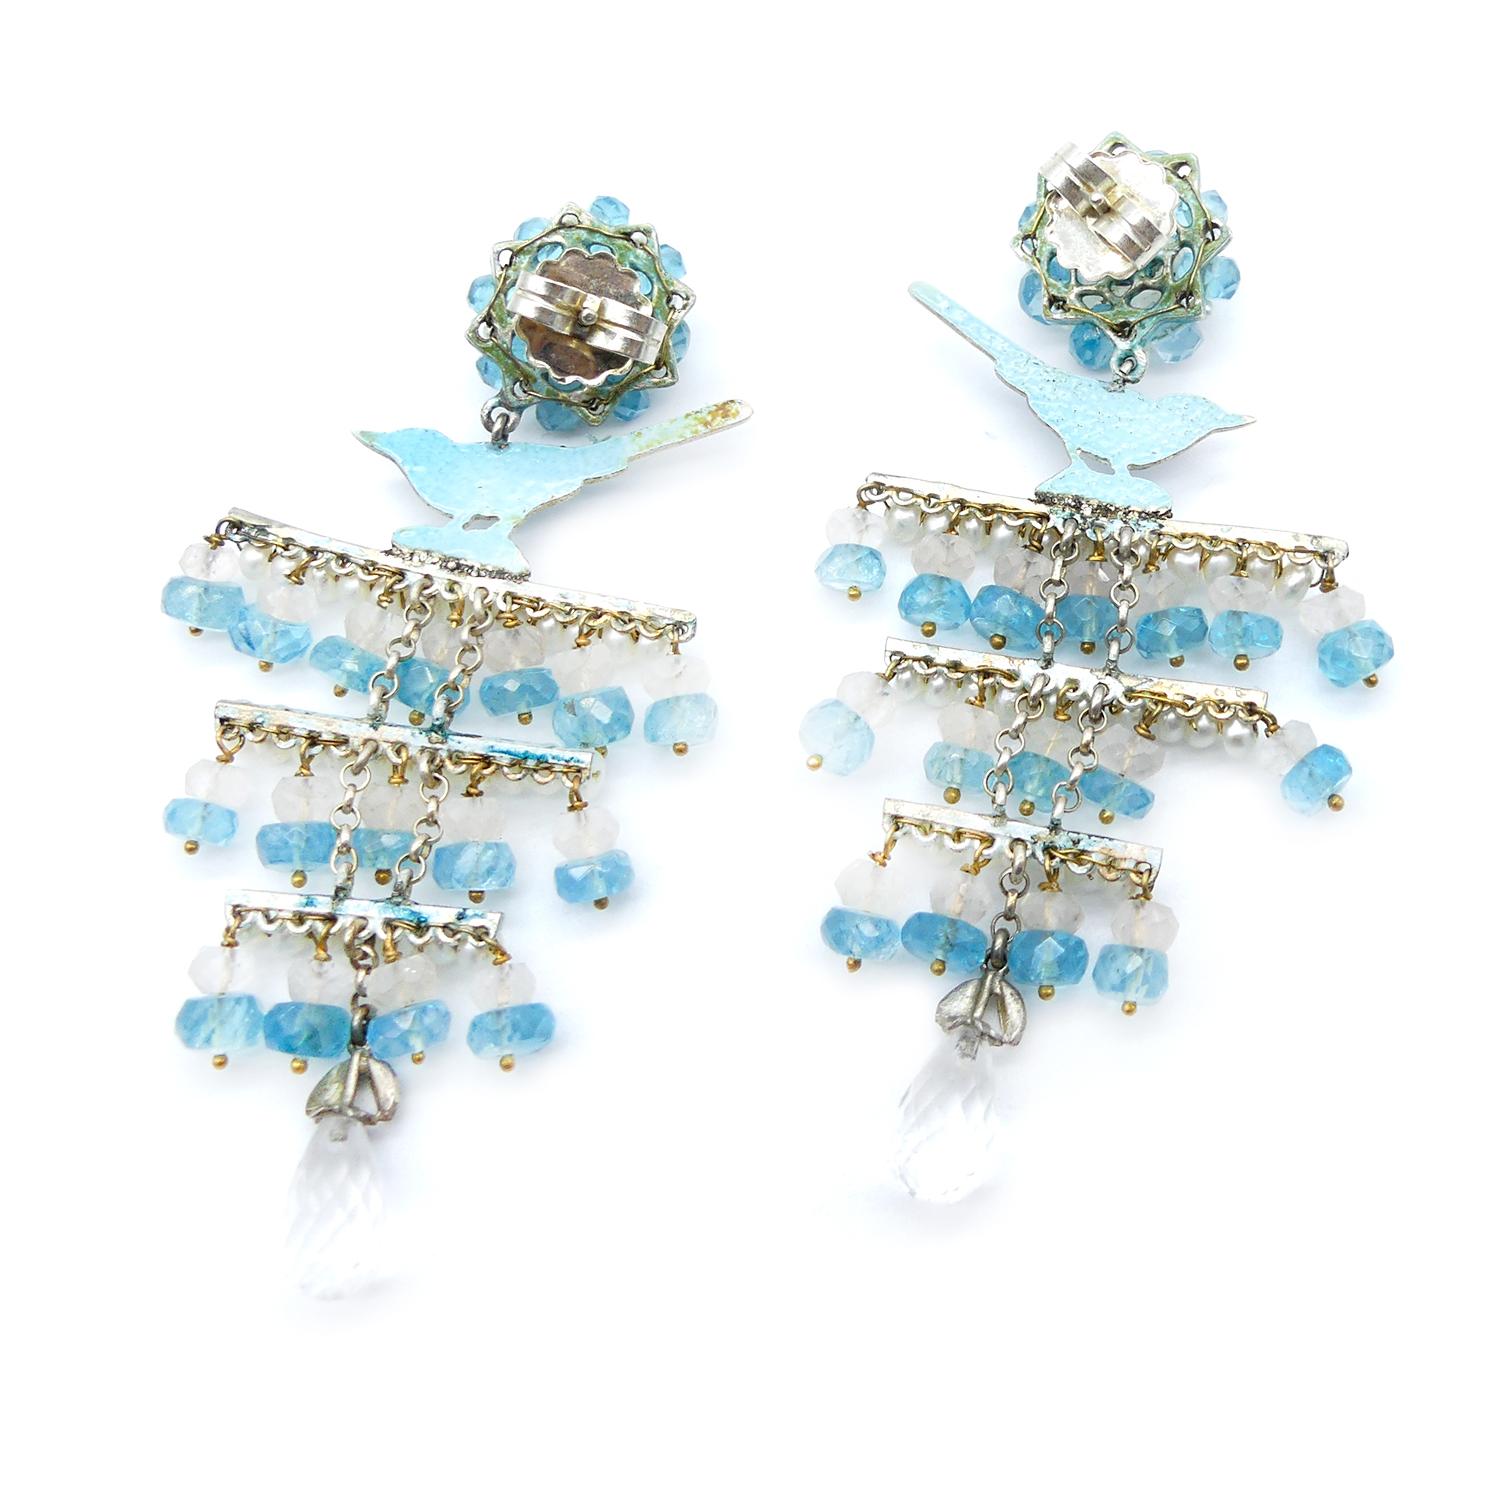 Contemporary Pearls Apatites Quartz Roses Traditional Silver Enameled Earrings Vicente Gracia